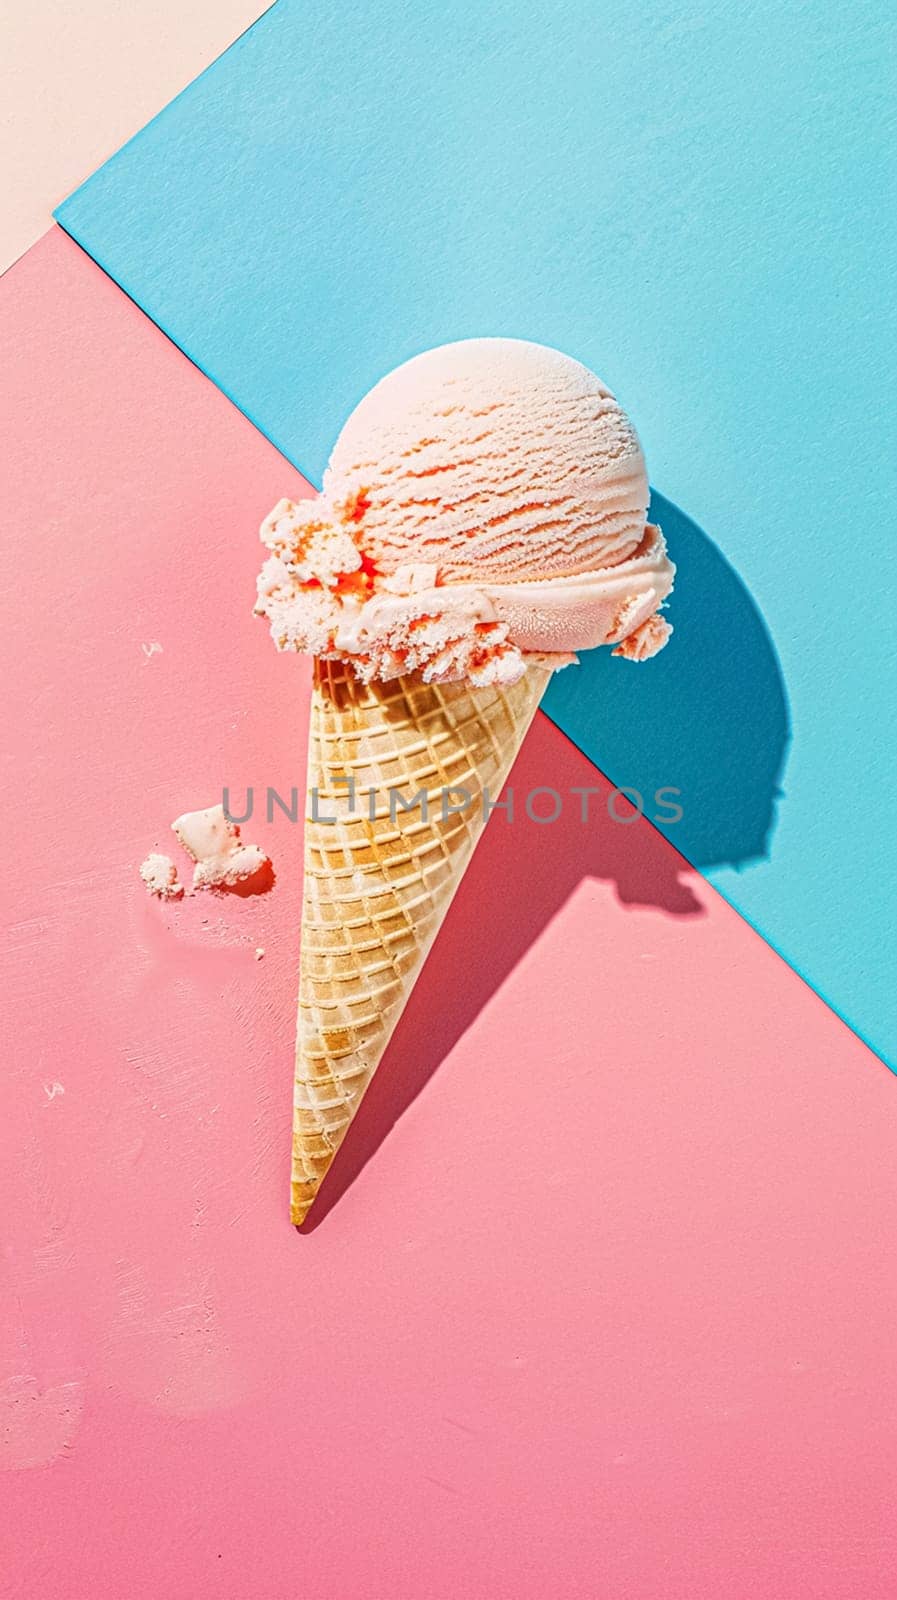 Scoops of ice cream in a waffle cone on colorful background by Olayola